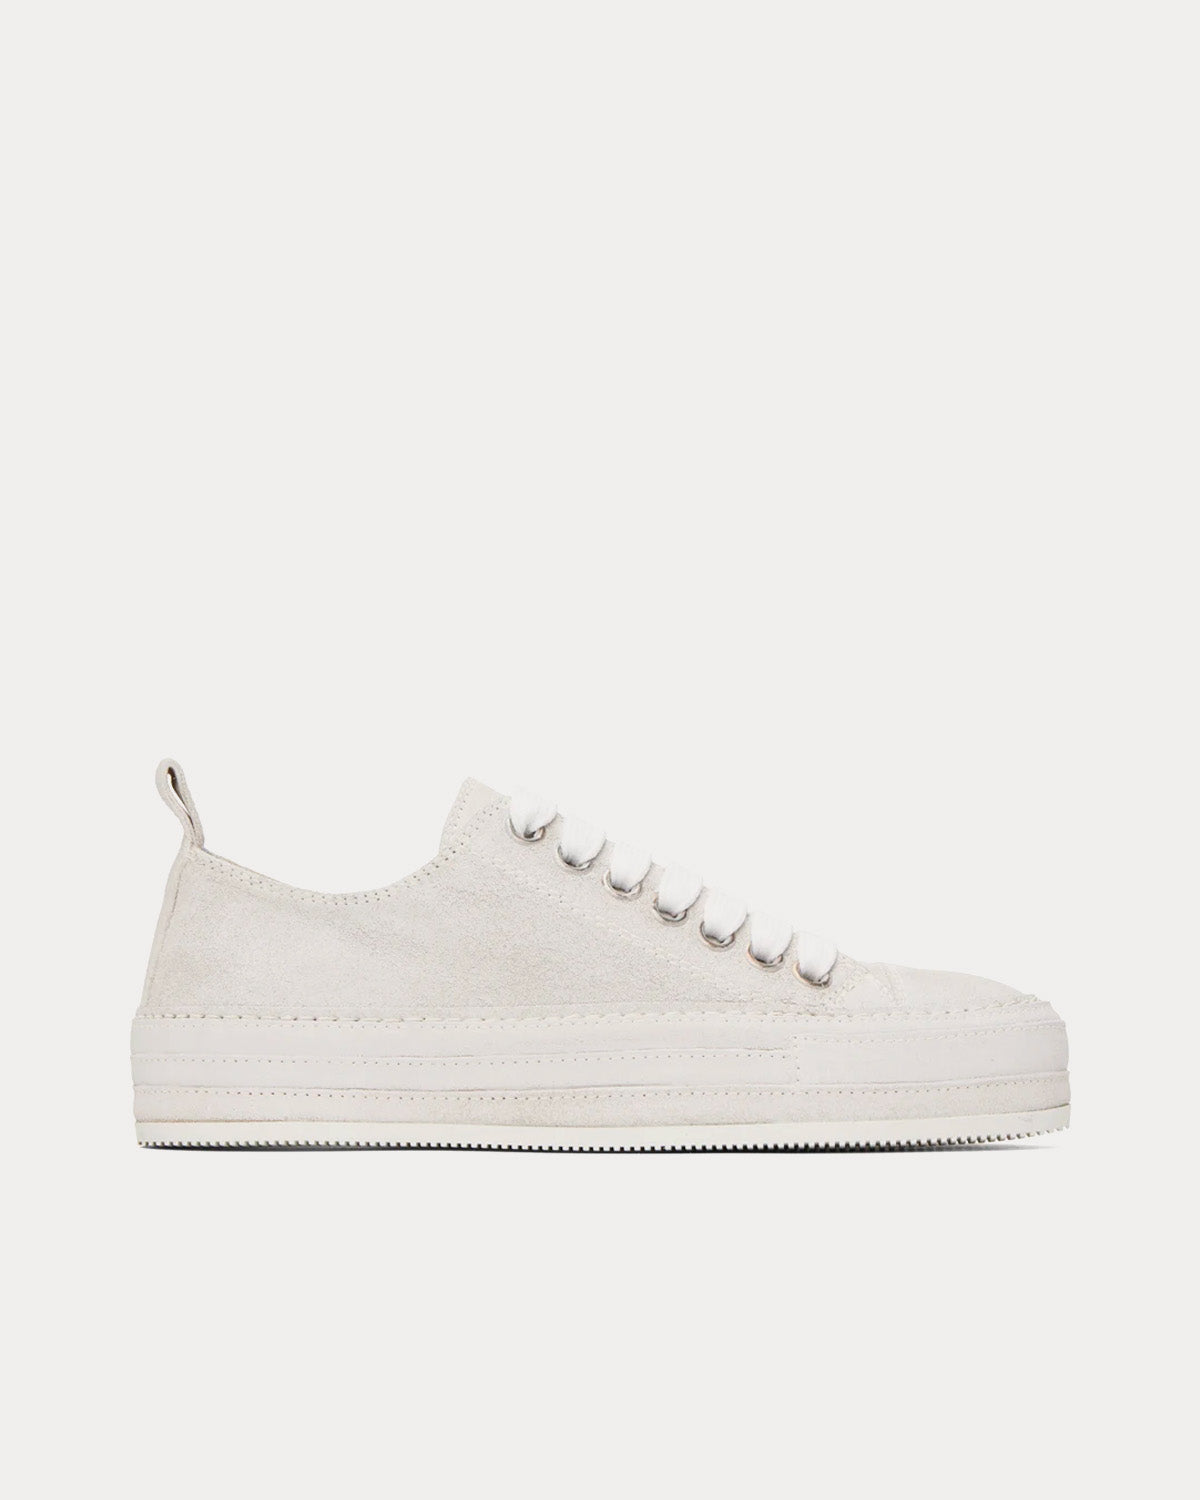 Ann Demeulemeester - Gert Leather White Low Top Sneakers